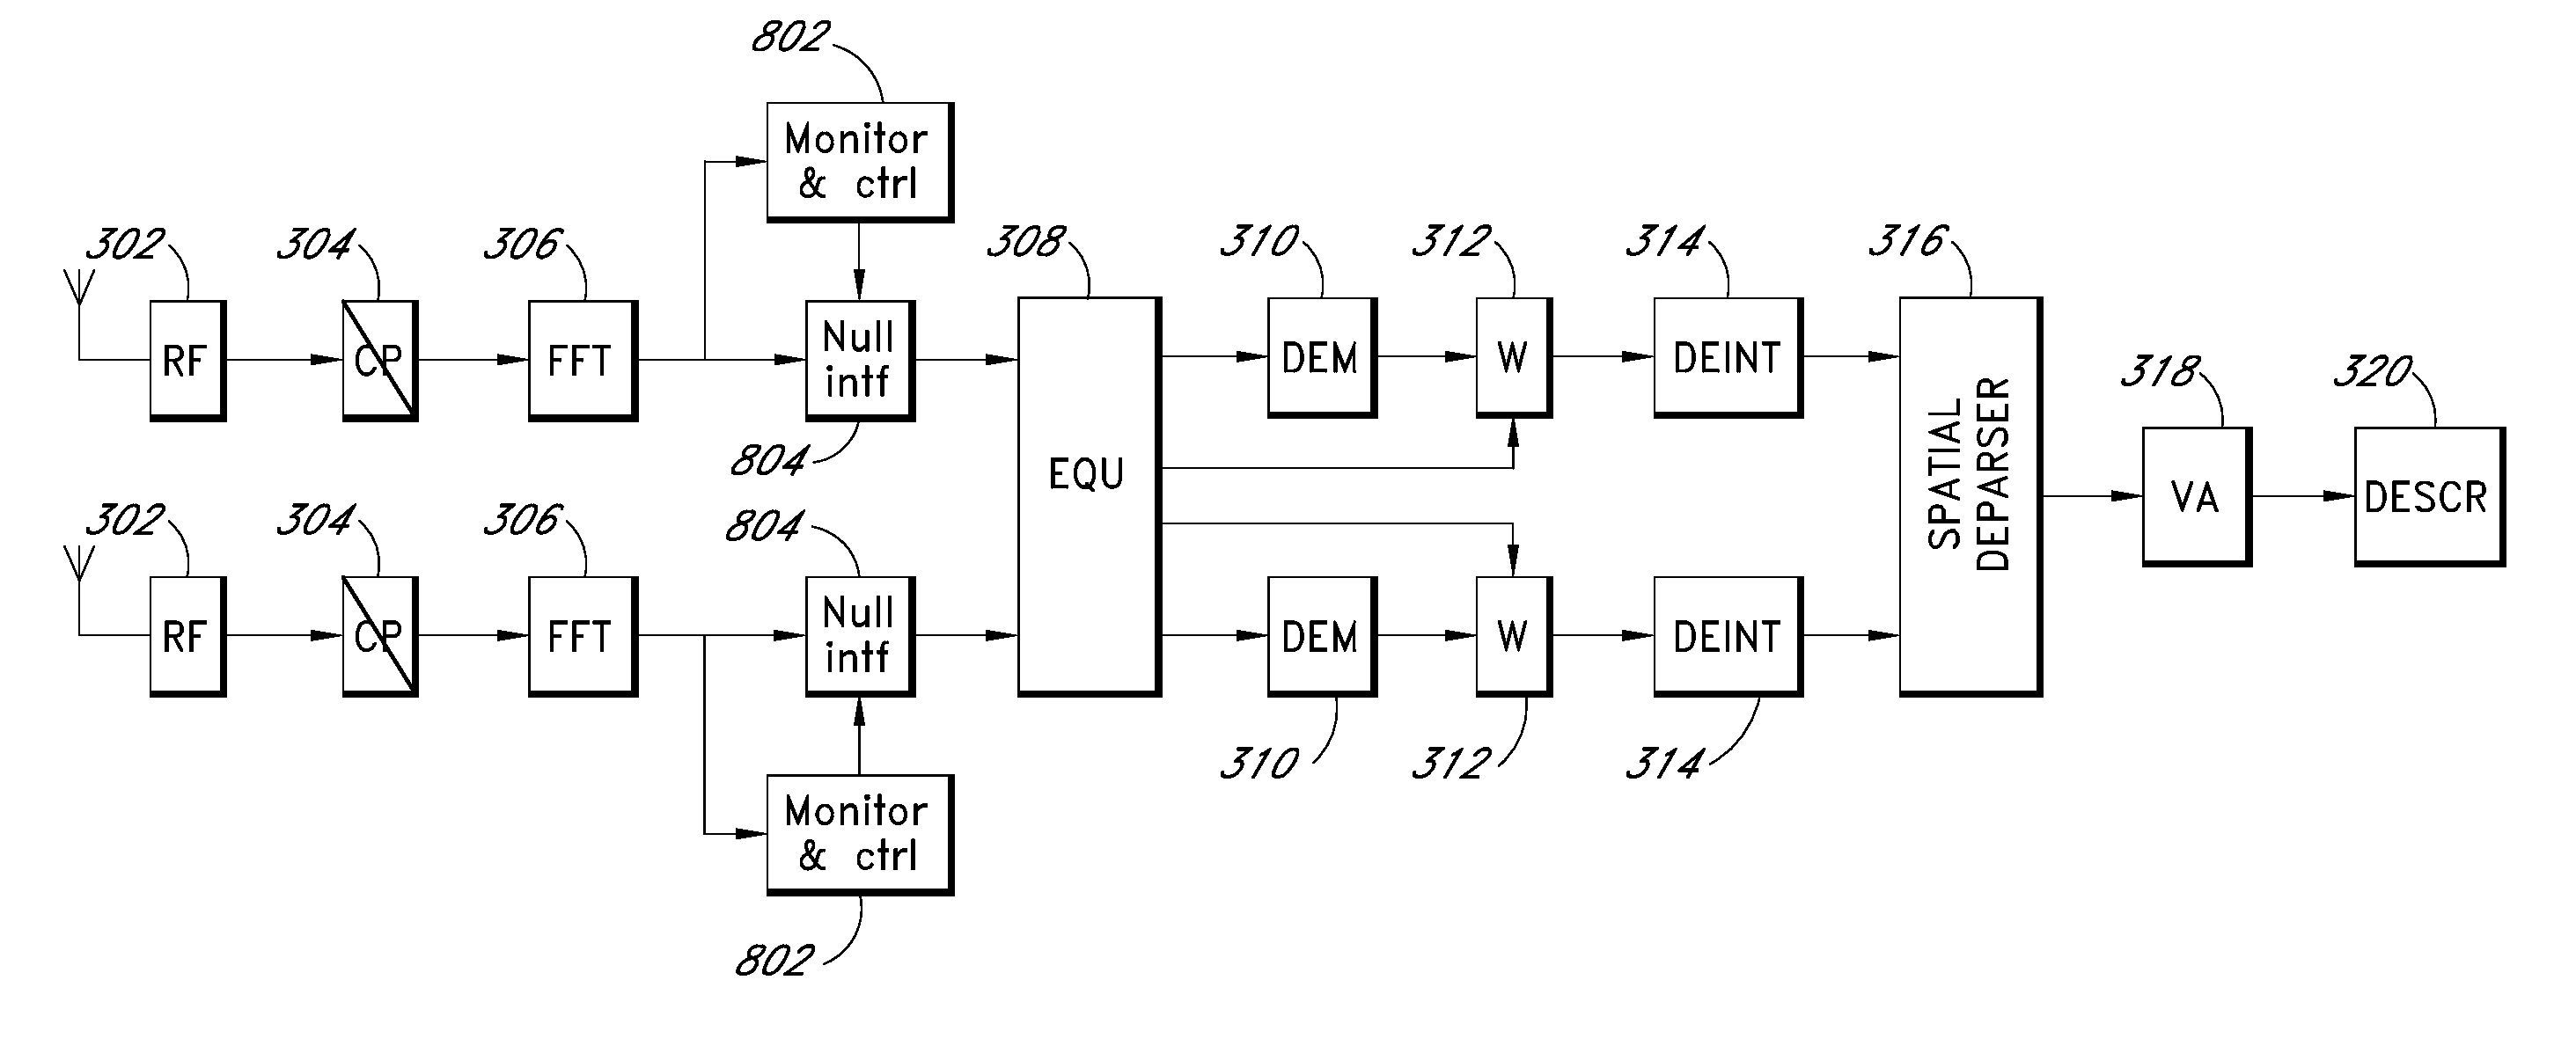 Interference erasure using soft decision weighting of the Viterbi decoder input in OFDM systems